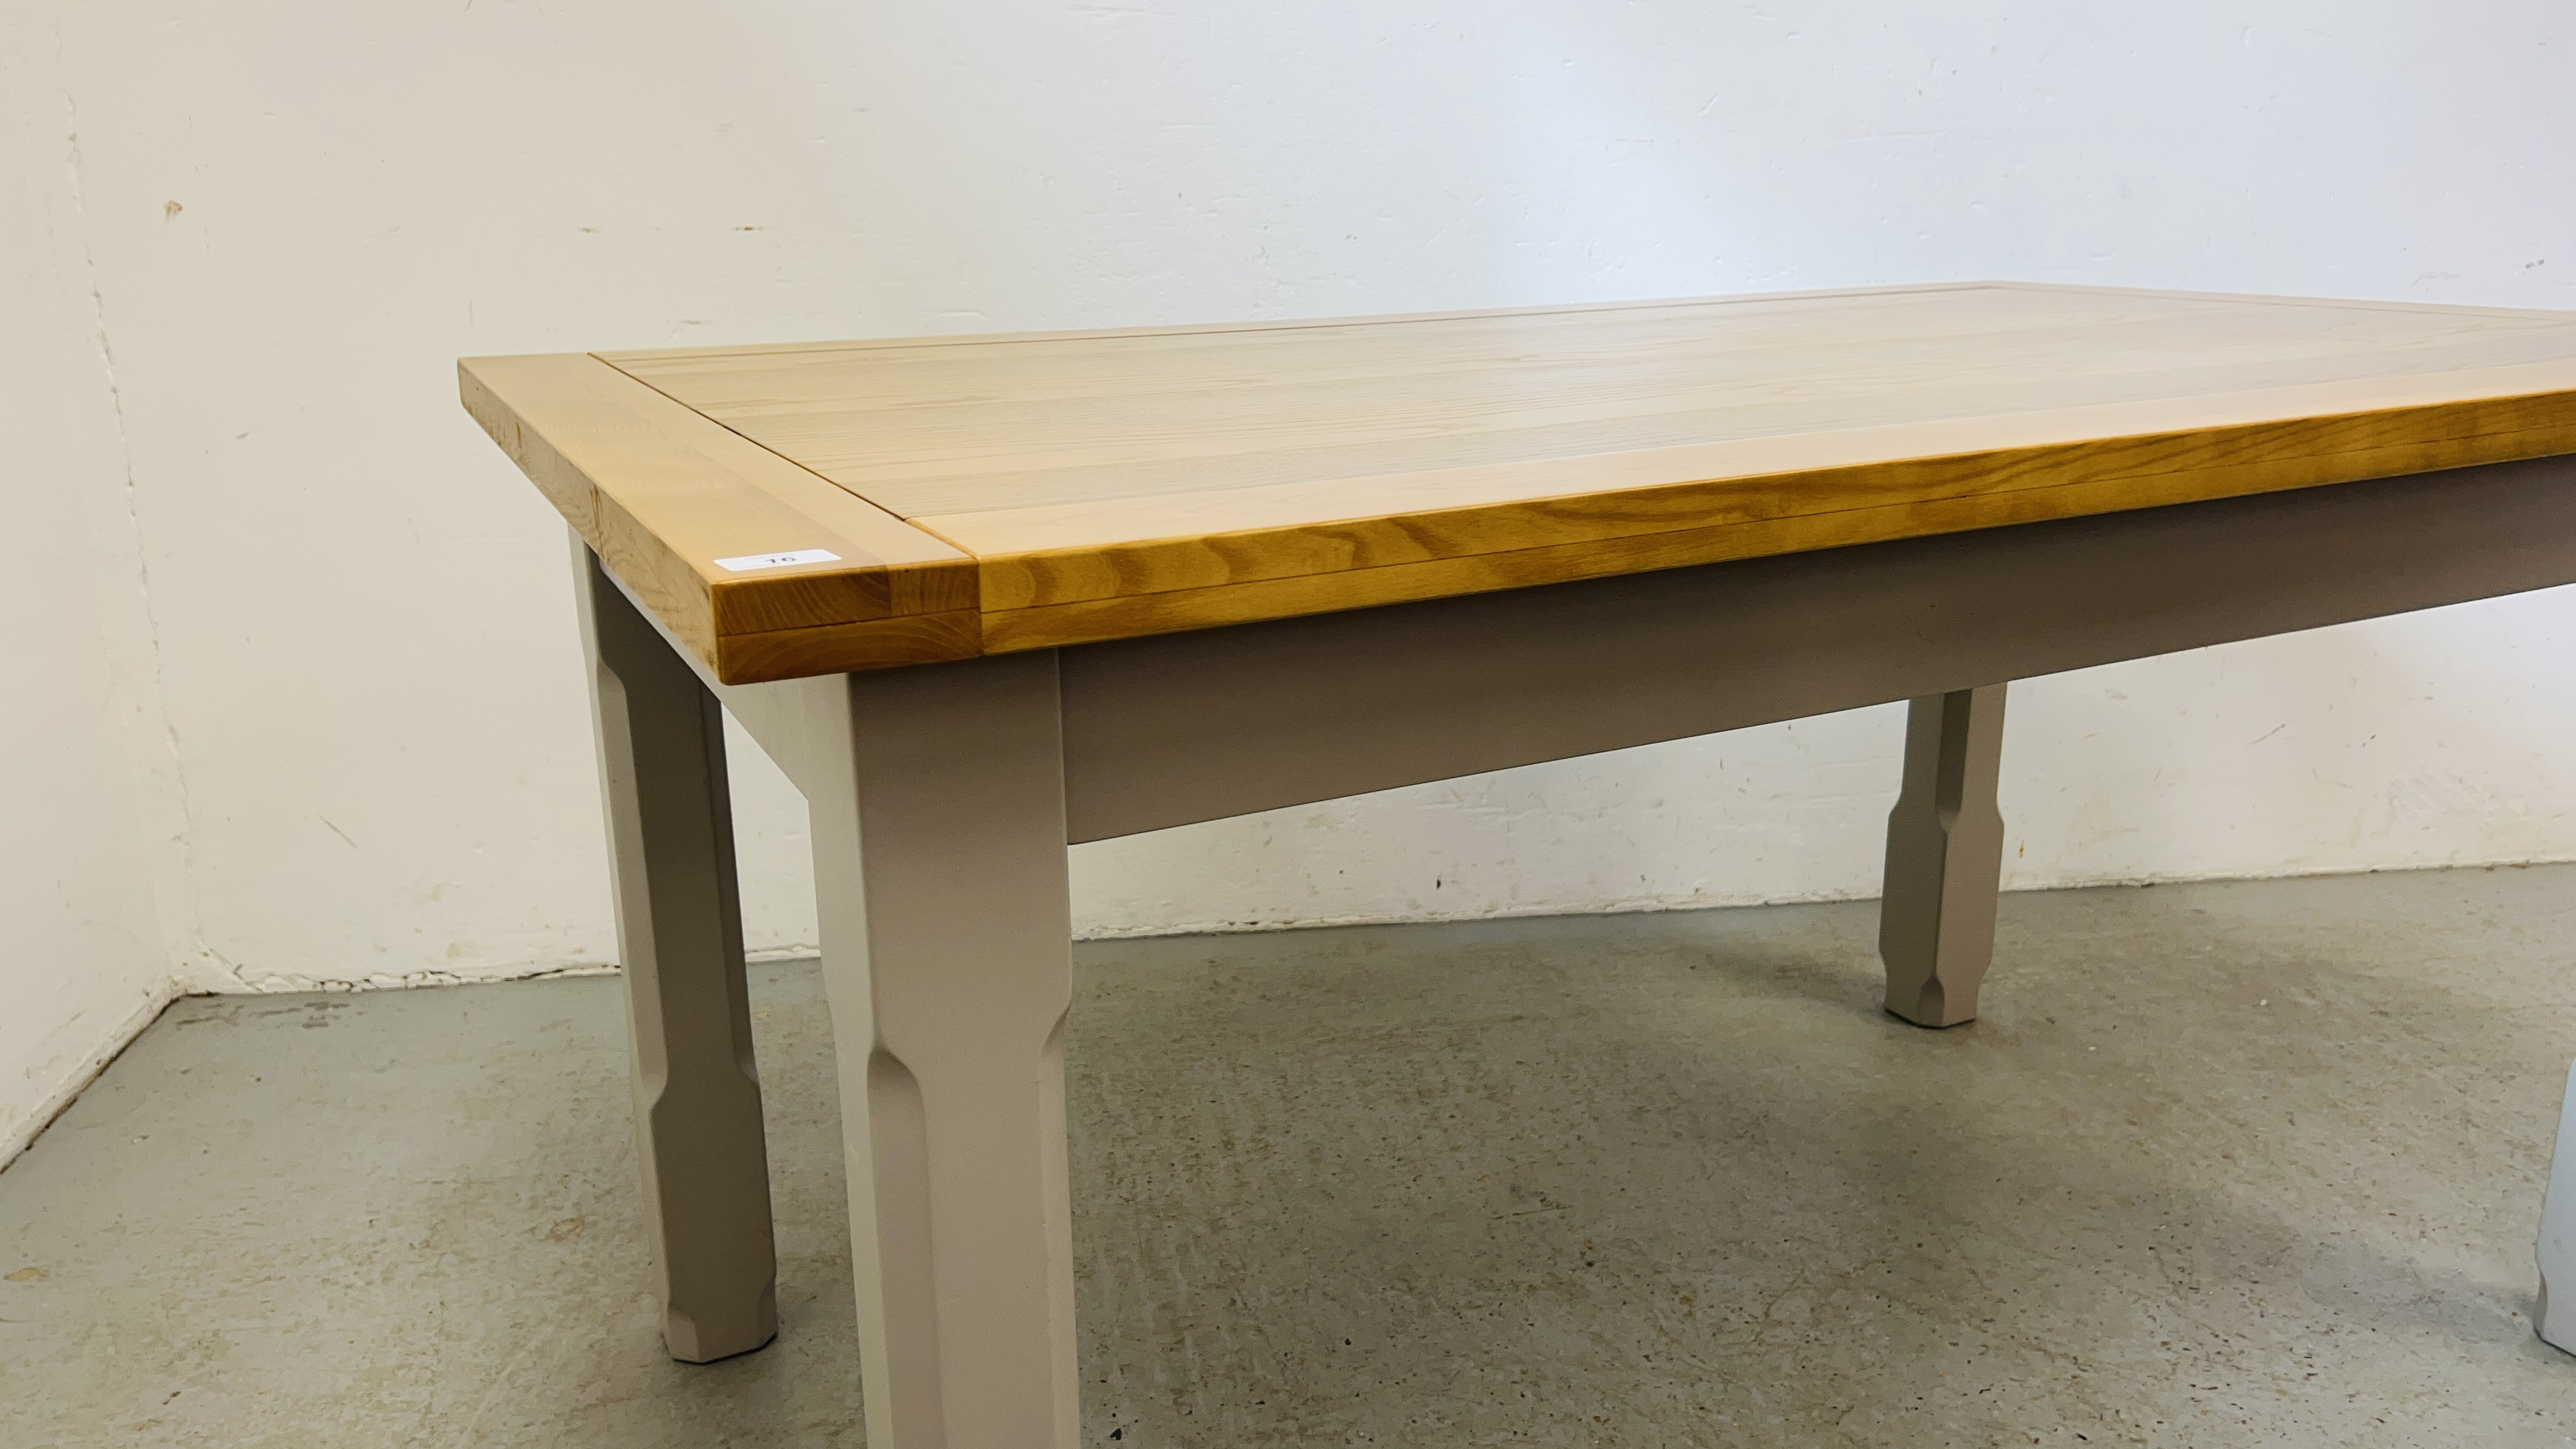 A MODERN DINING TABLE WITH PINE FINISH TOP AND GREY PAINTED FRAME - W 90CM. L 150CM. - Image 8 of 8